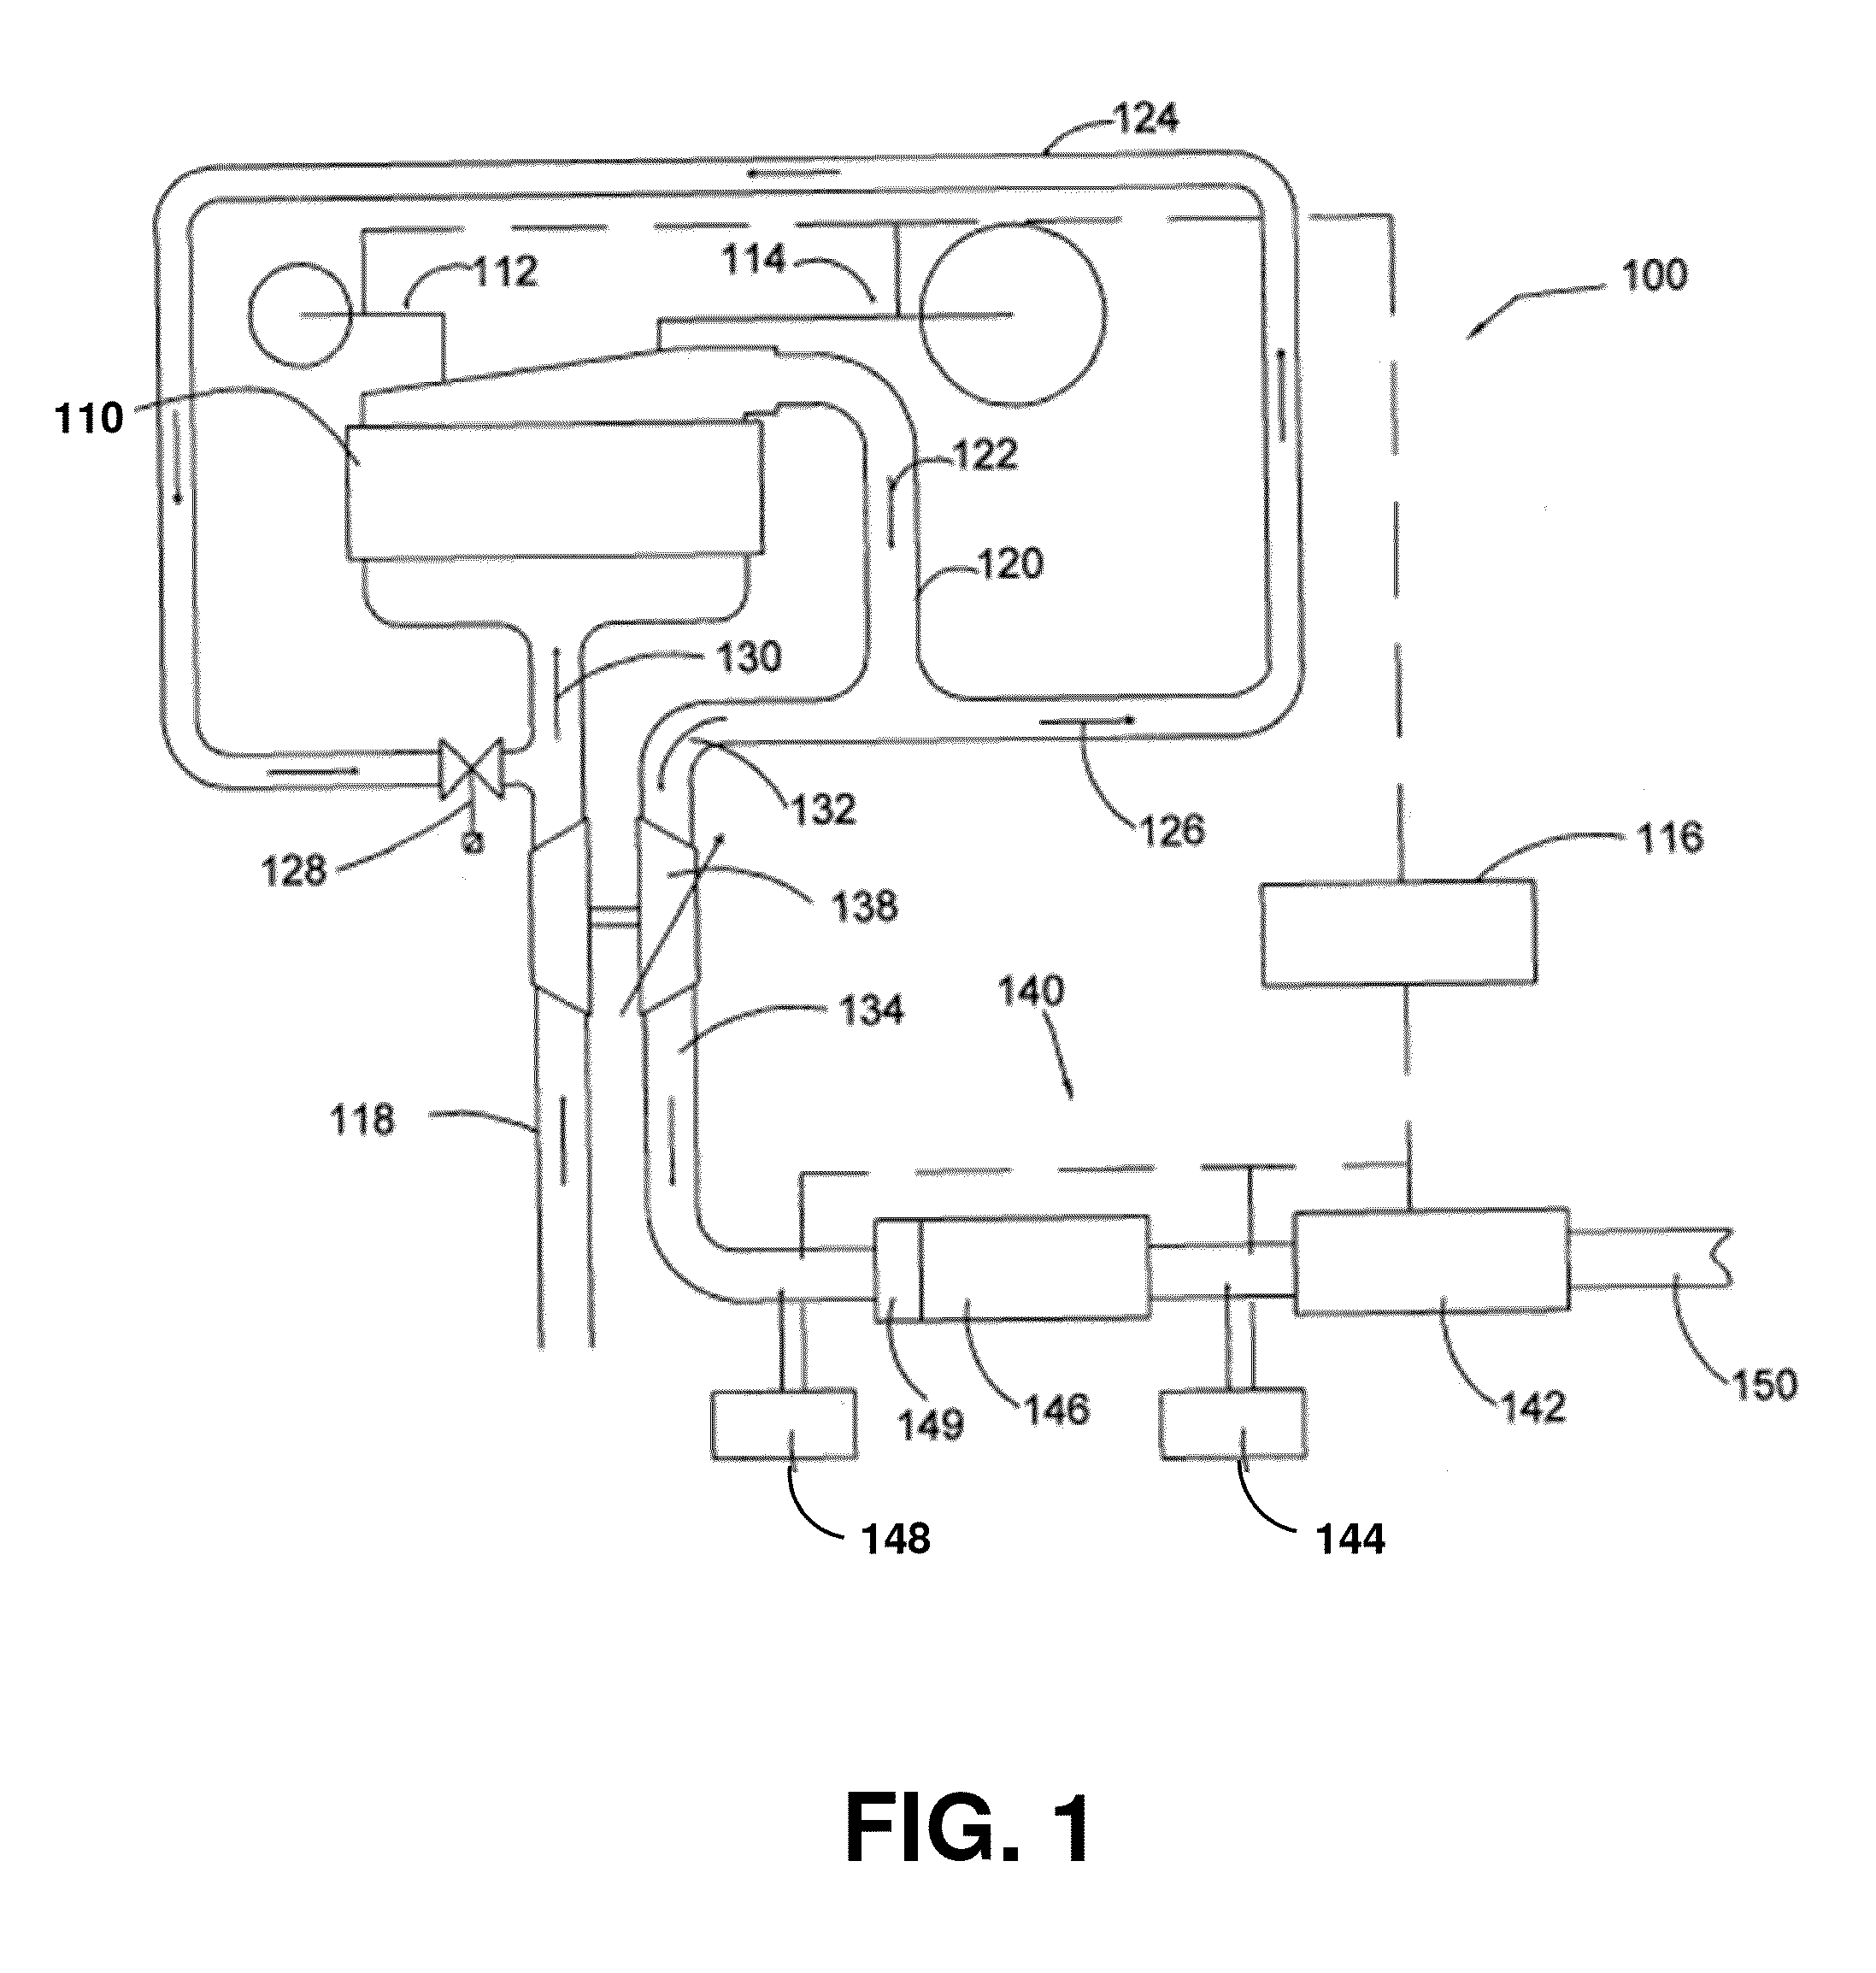 Method Of Controlling A Direct-Injection Gaseous-Fuelled Internal Combustion Engine System With A Selective Catalytic Reduction Converter